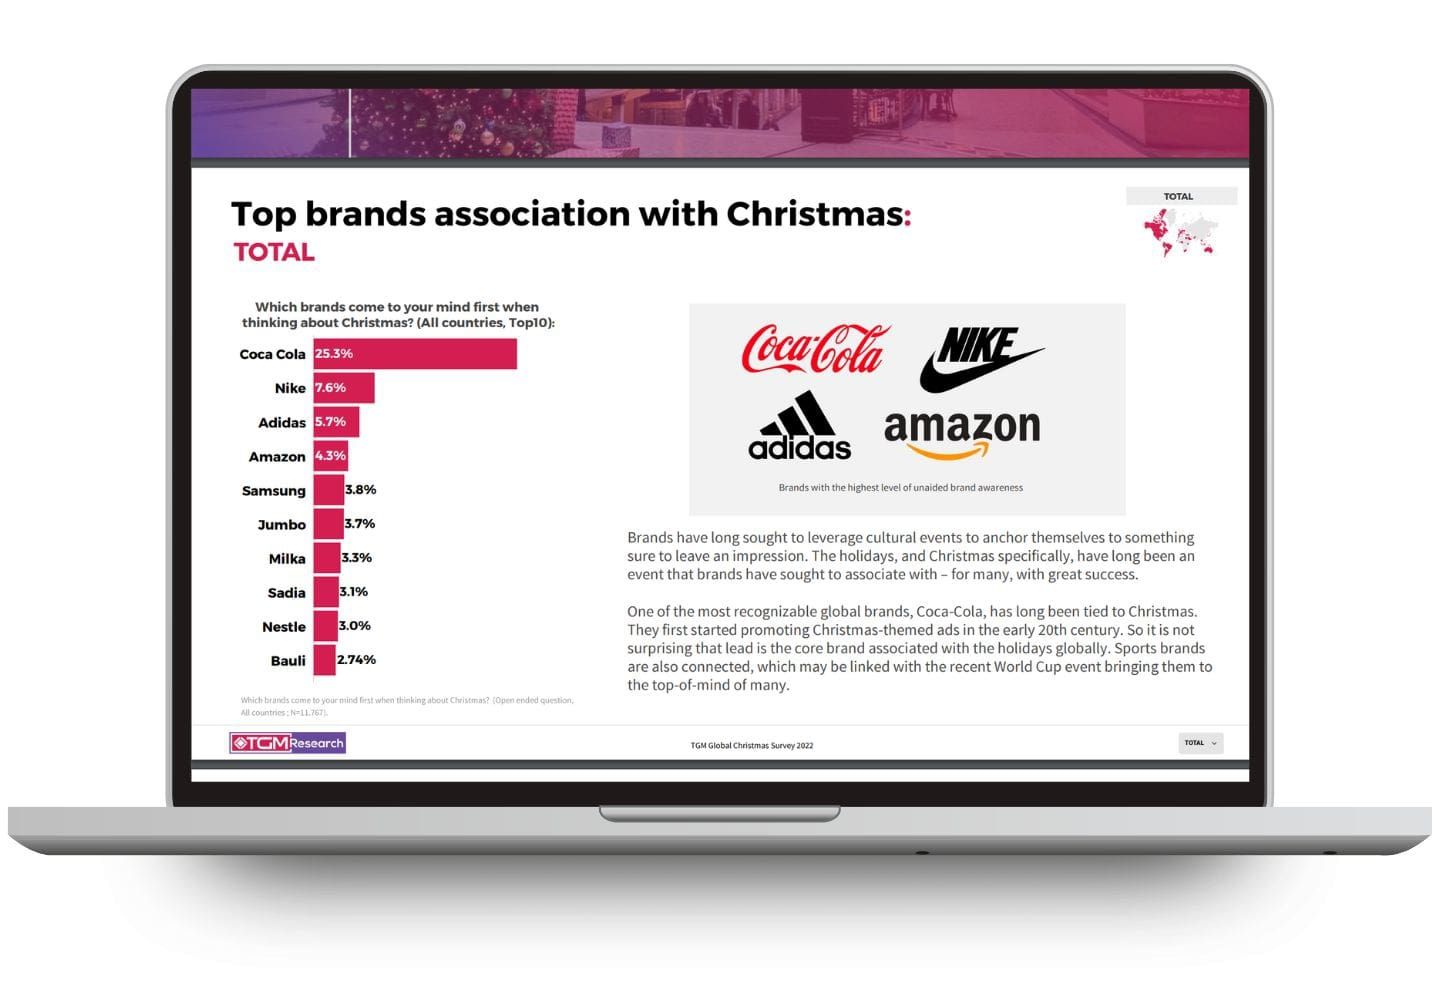 Top brands association with Christmas